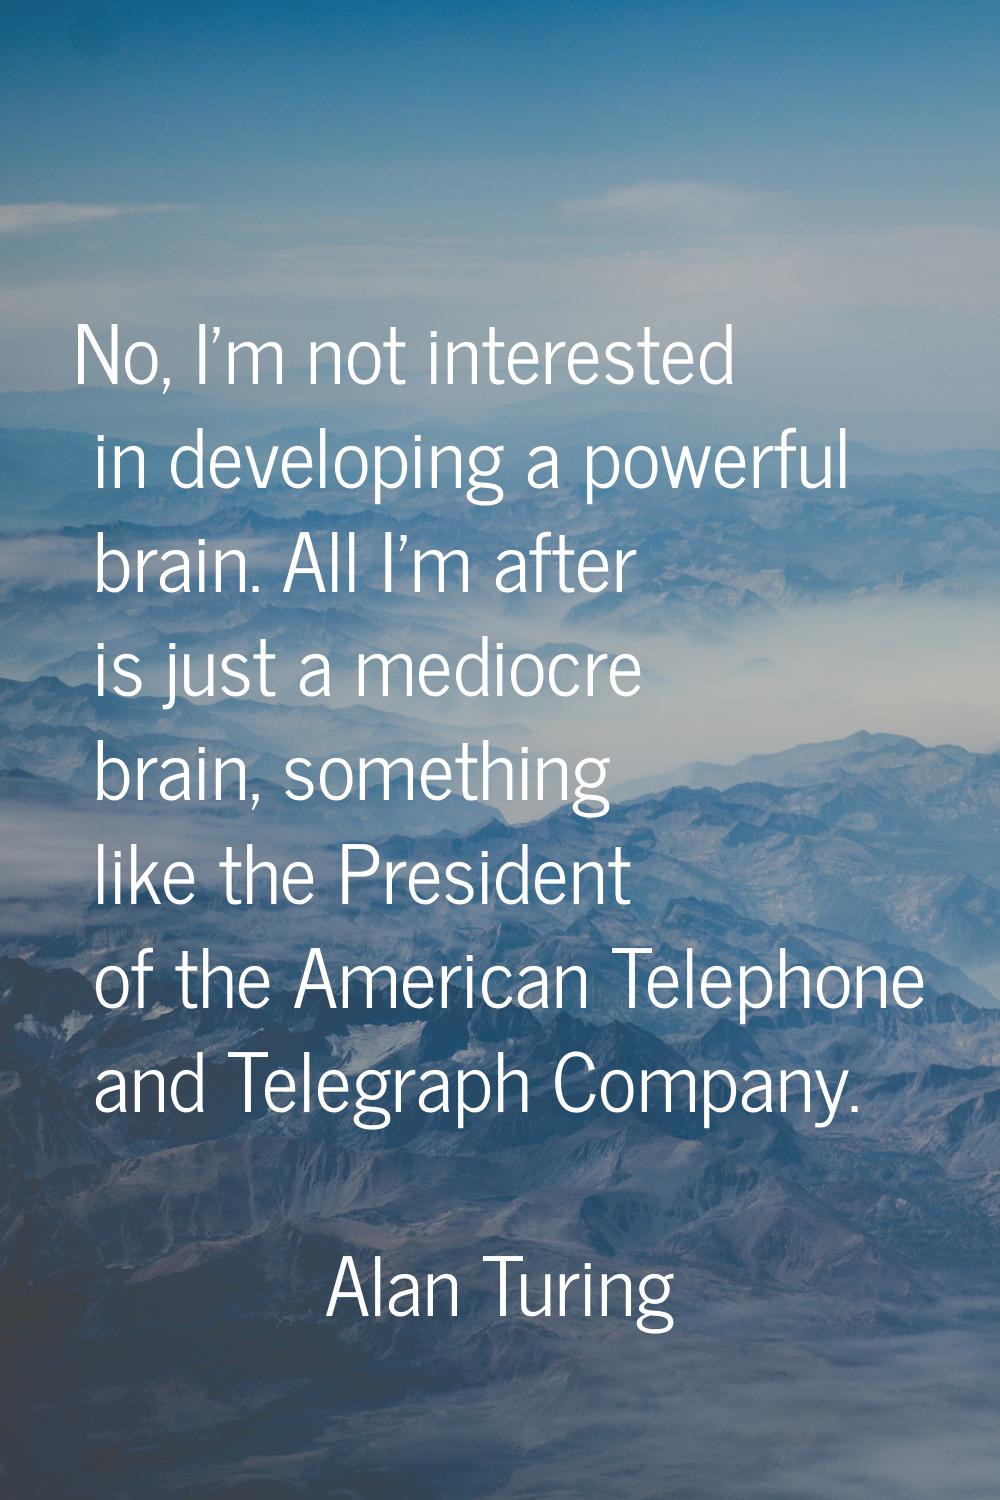 No, I'm not interested in developing a powerful brain. All I'm after is just a mediocre brain, some